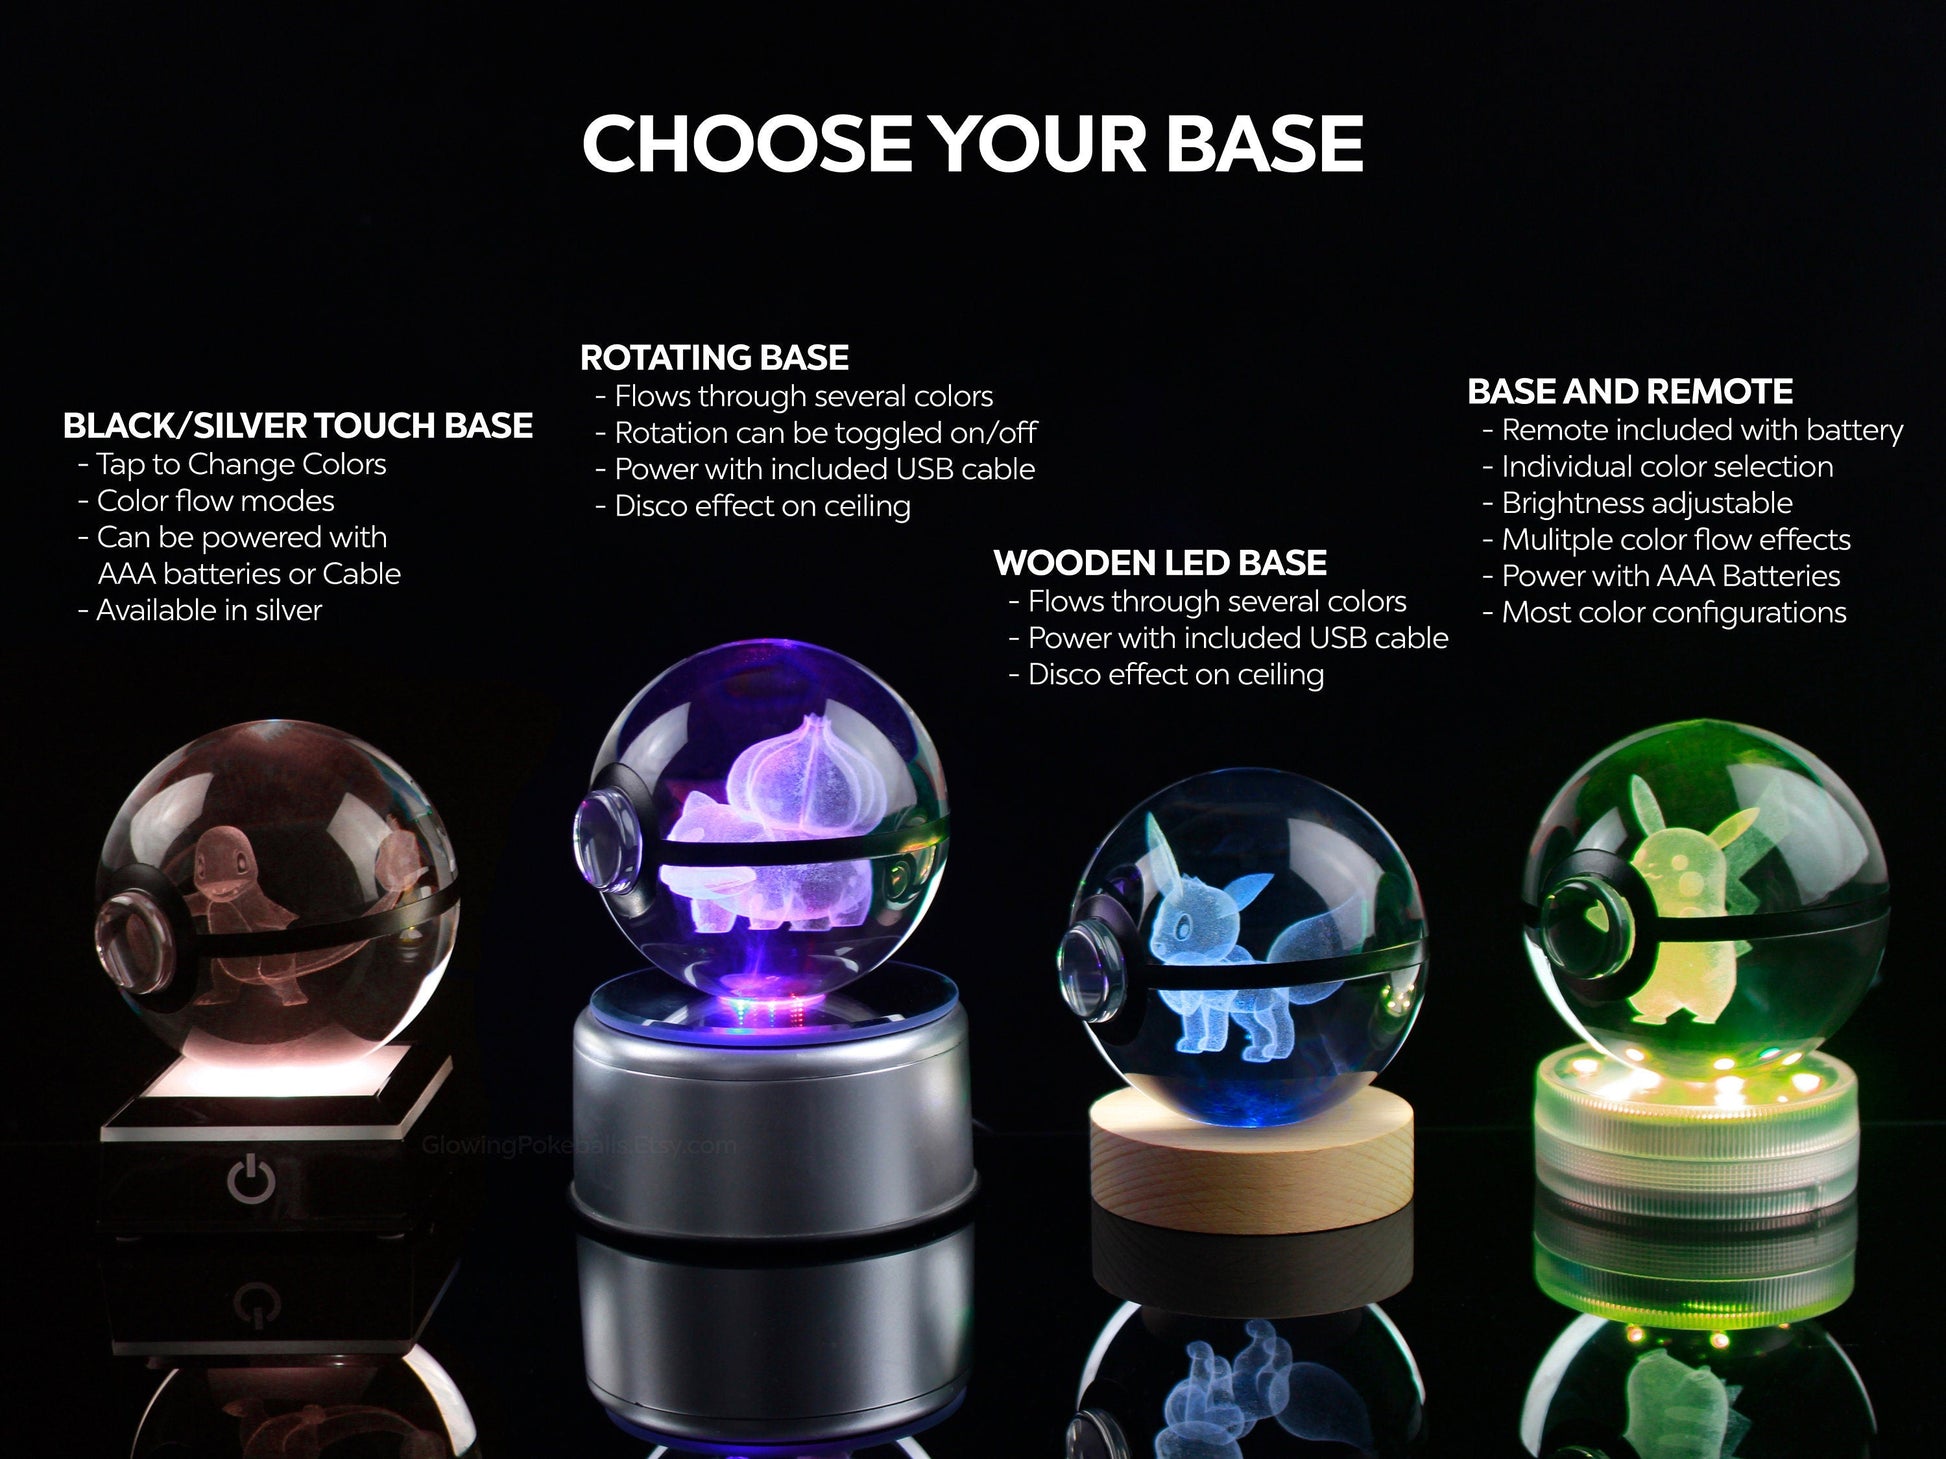 Look into our crystal ball; we see a Pokémon that's right for you!【Pics】